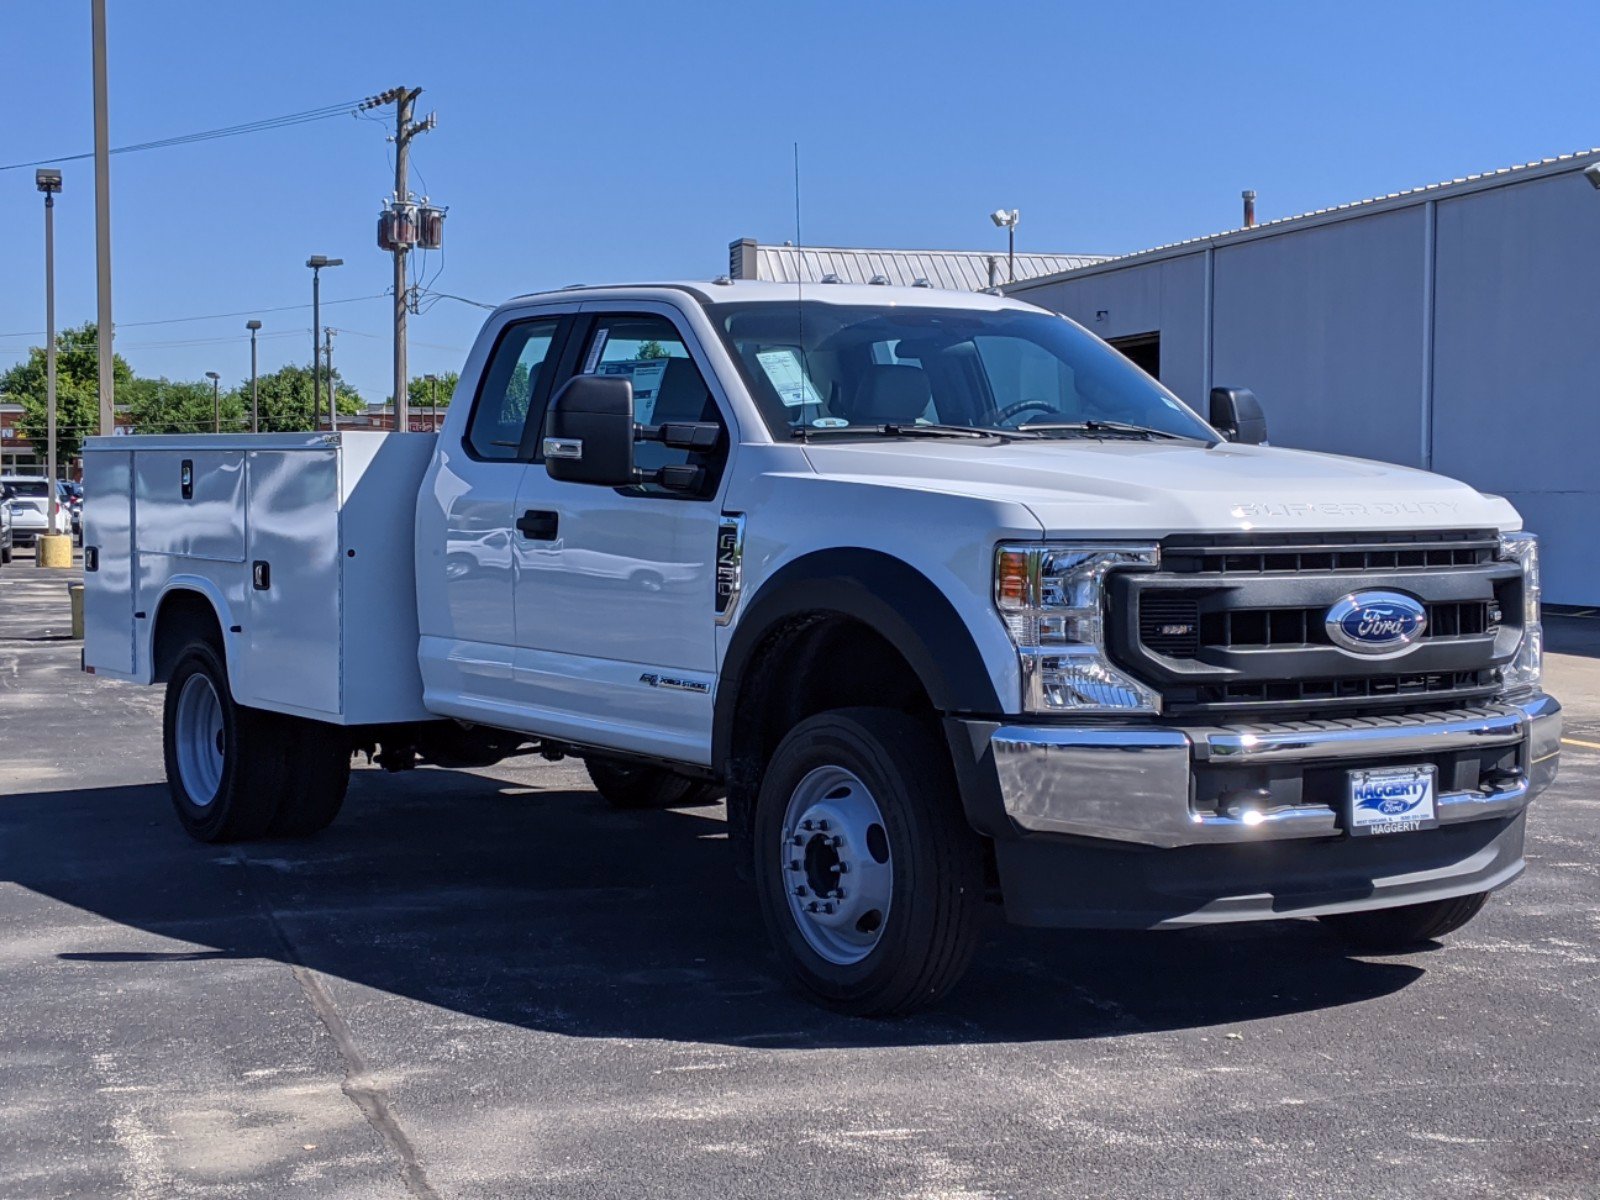 New 2020 Ford Super Duty F450 DRW XL Extended Cab ChassisCab in Glen